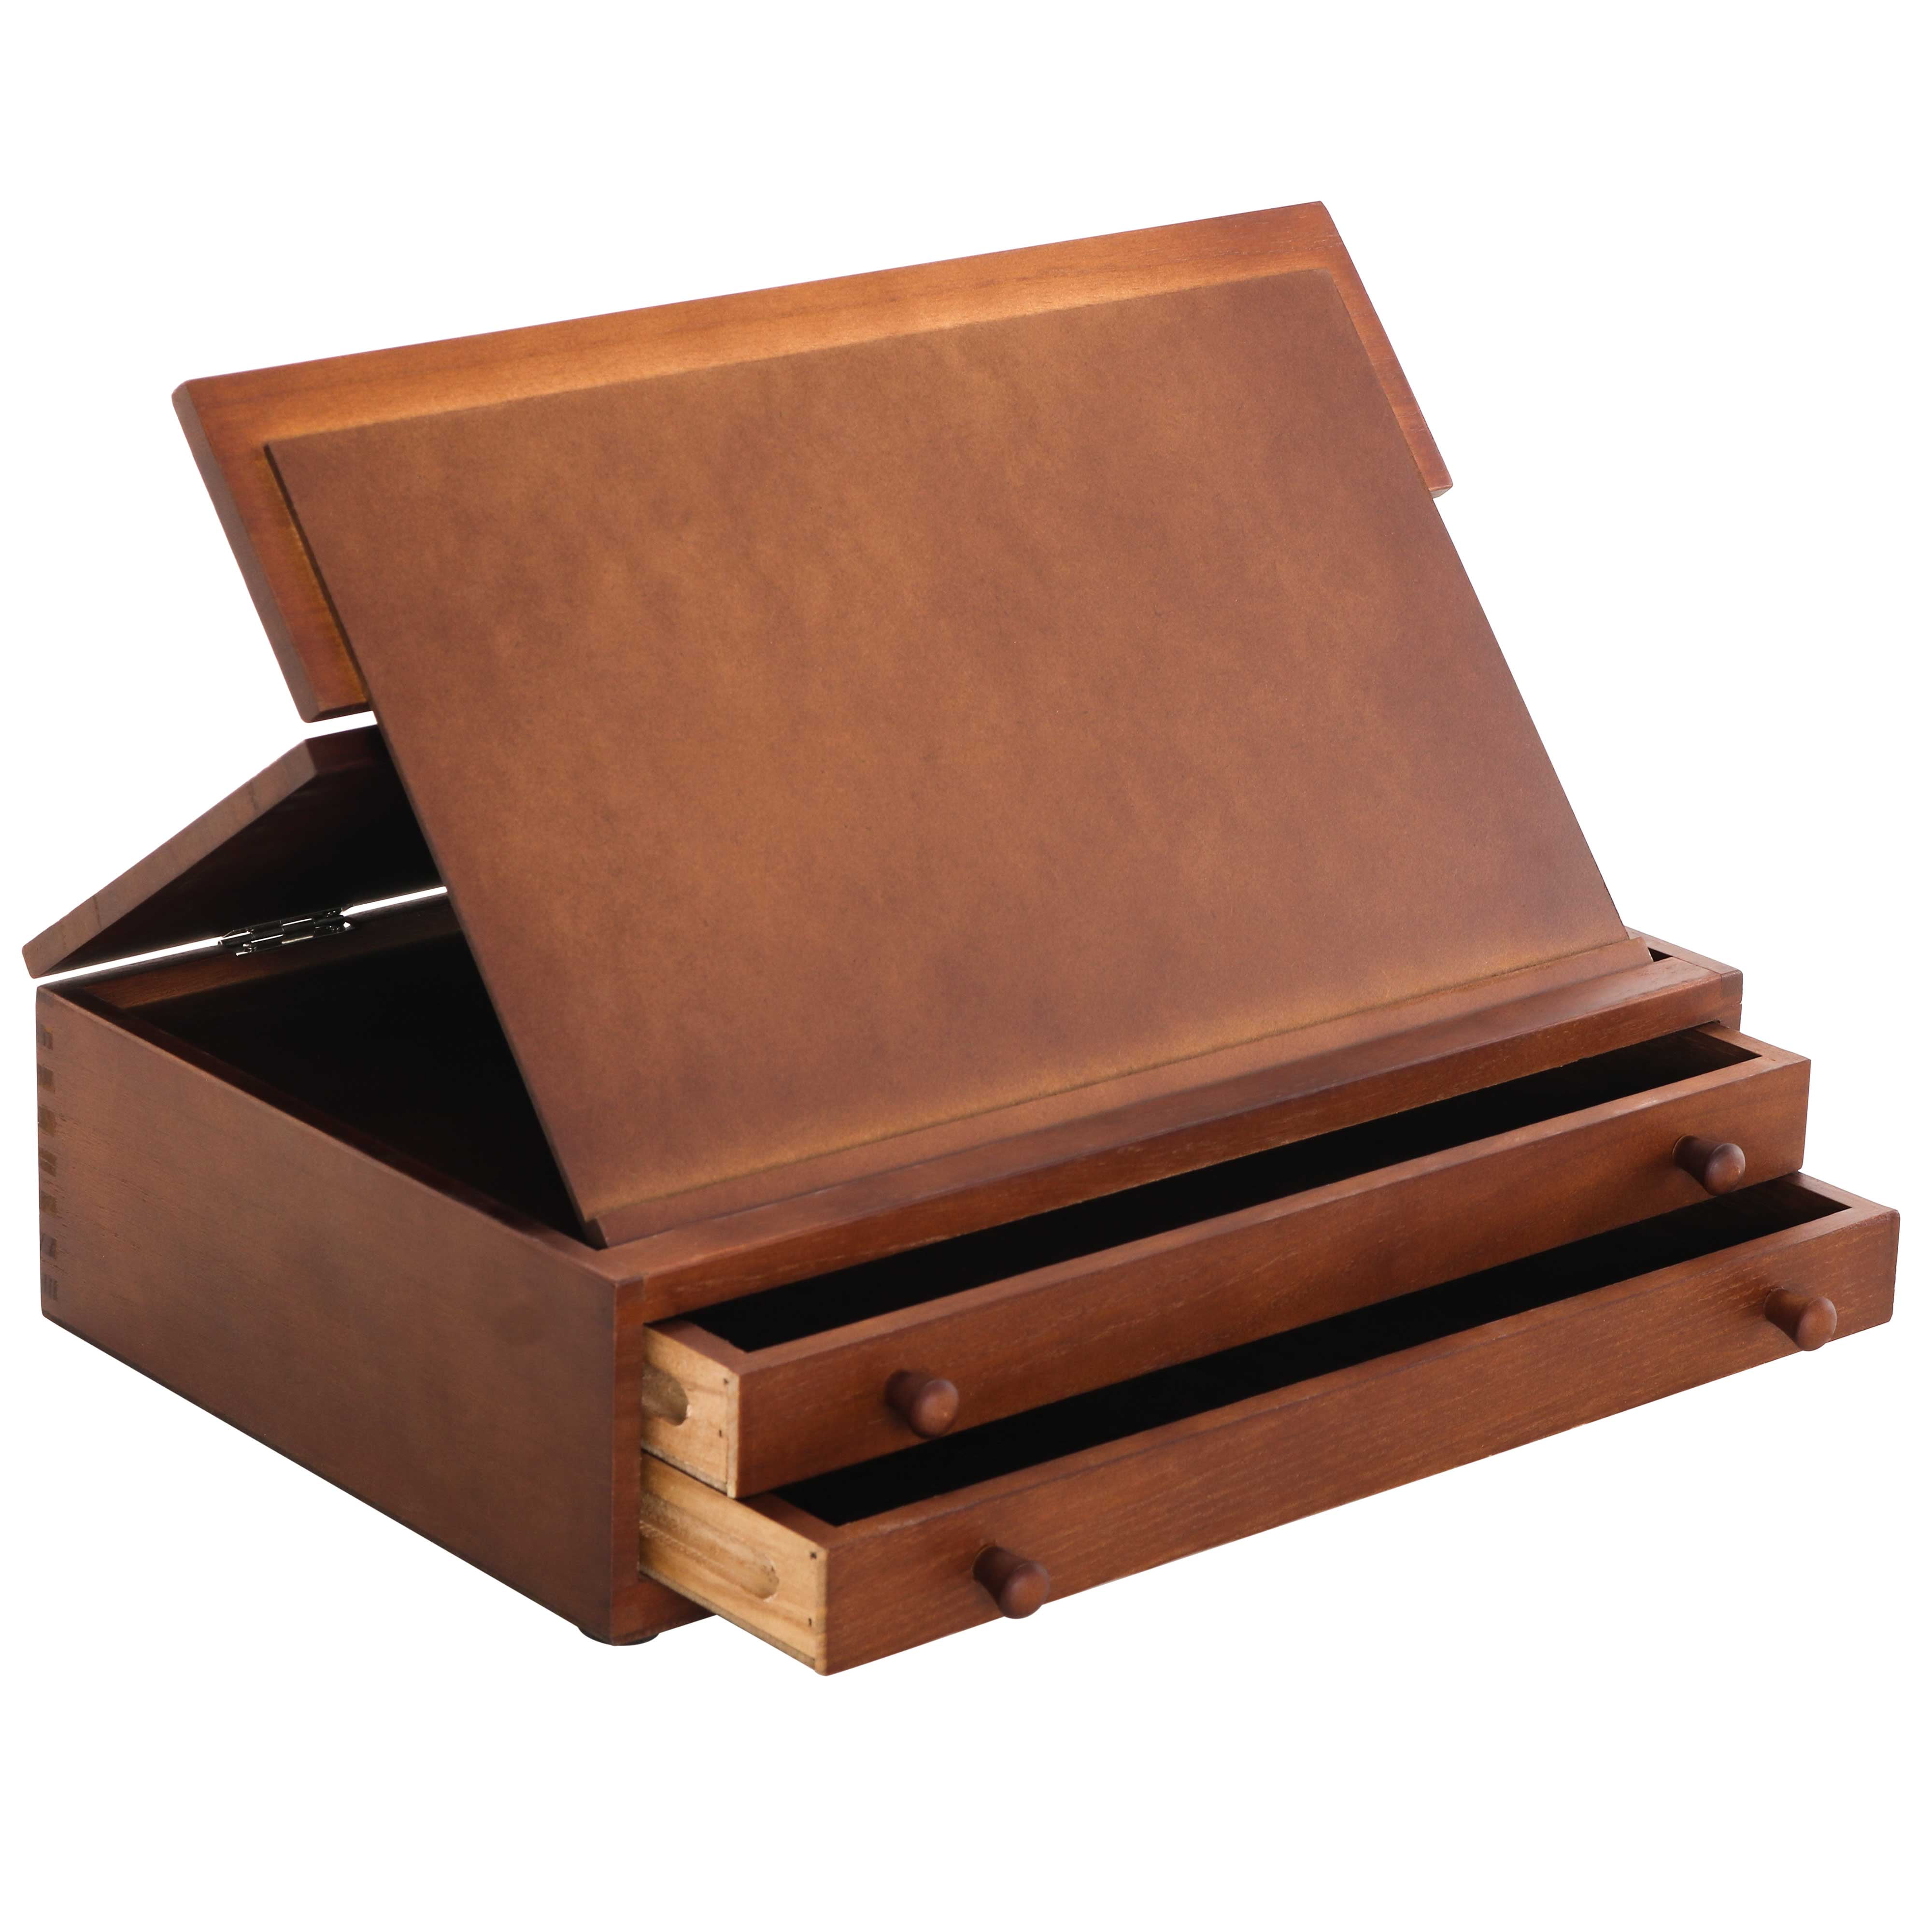 Falling in Art Adjustable Solid Wood Table Sketch Box Easel with Storage Drawer